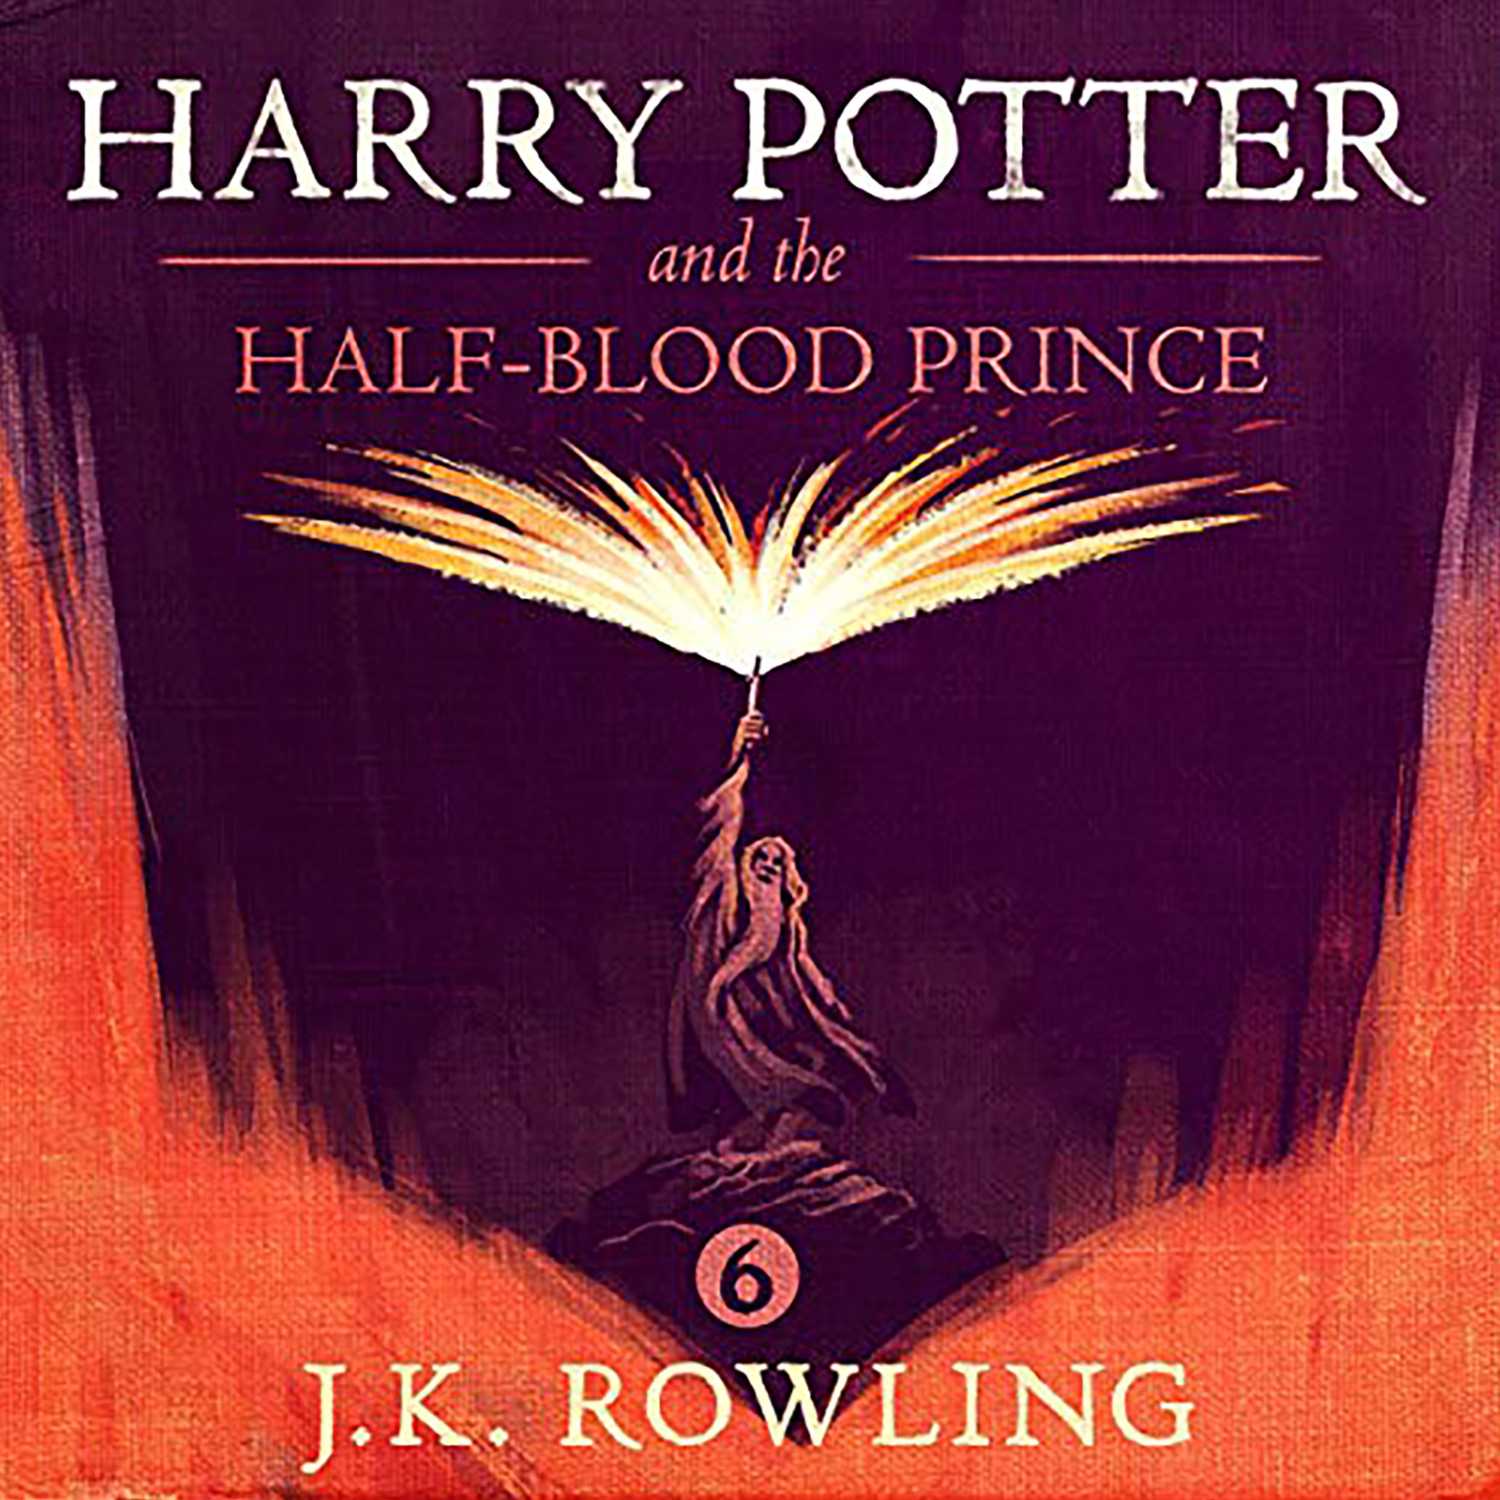 Harry Potter and the Half-Blood Prince Part 4